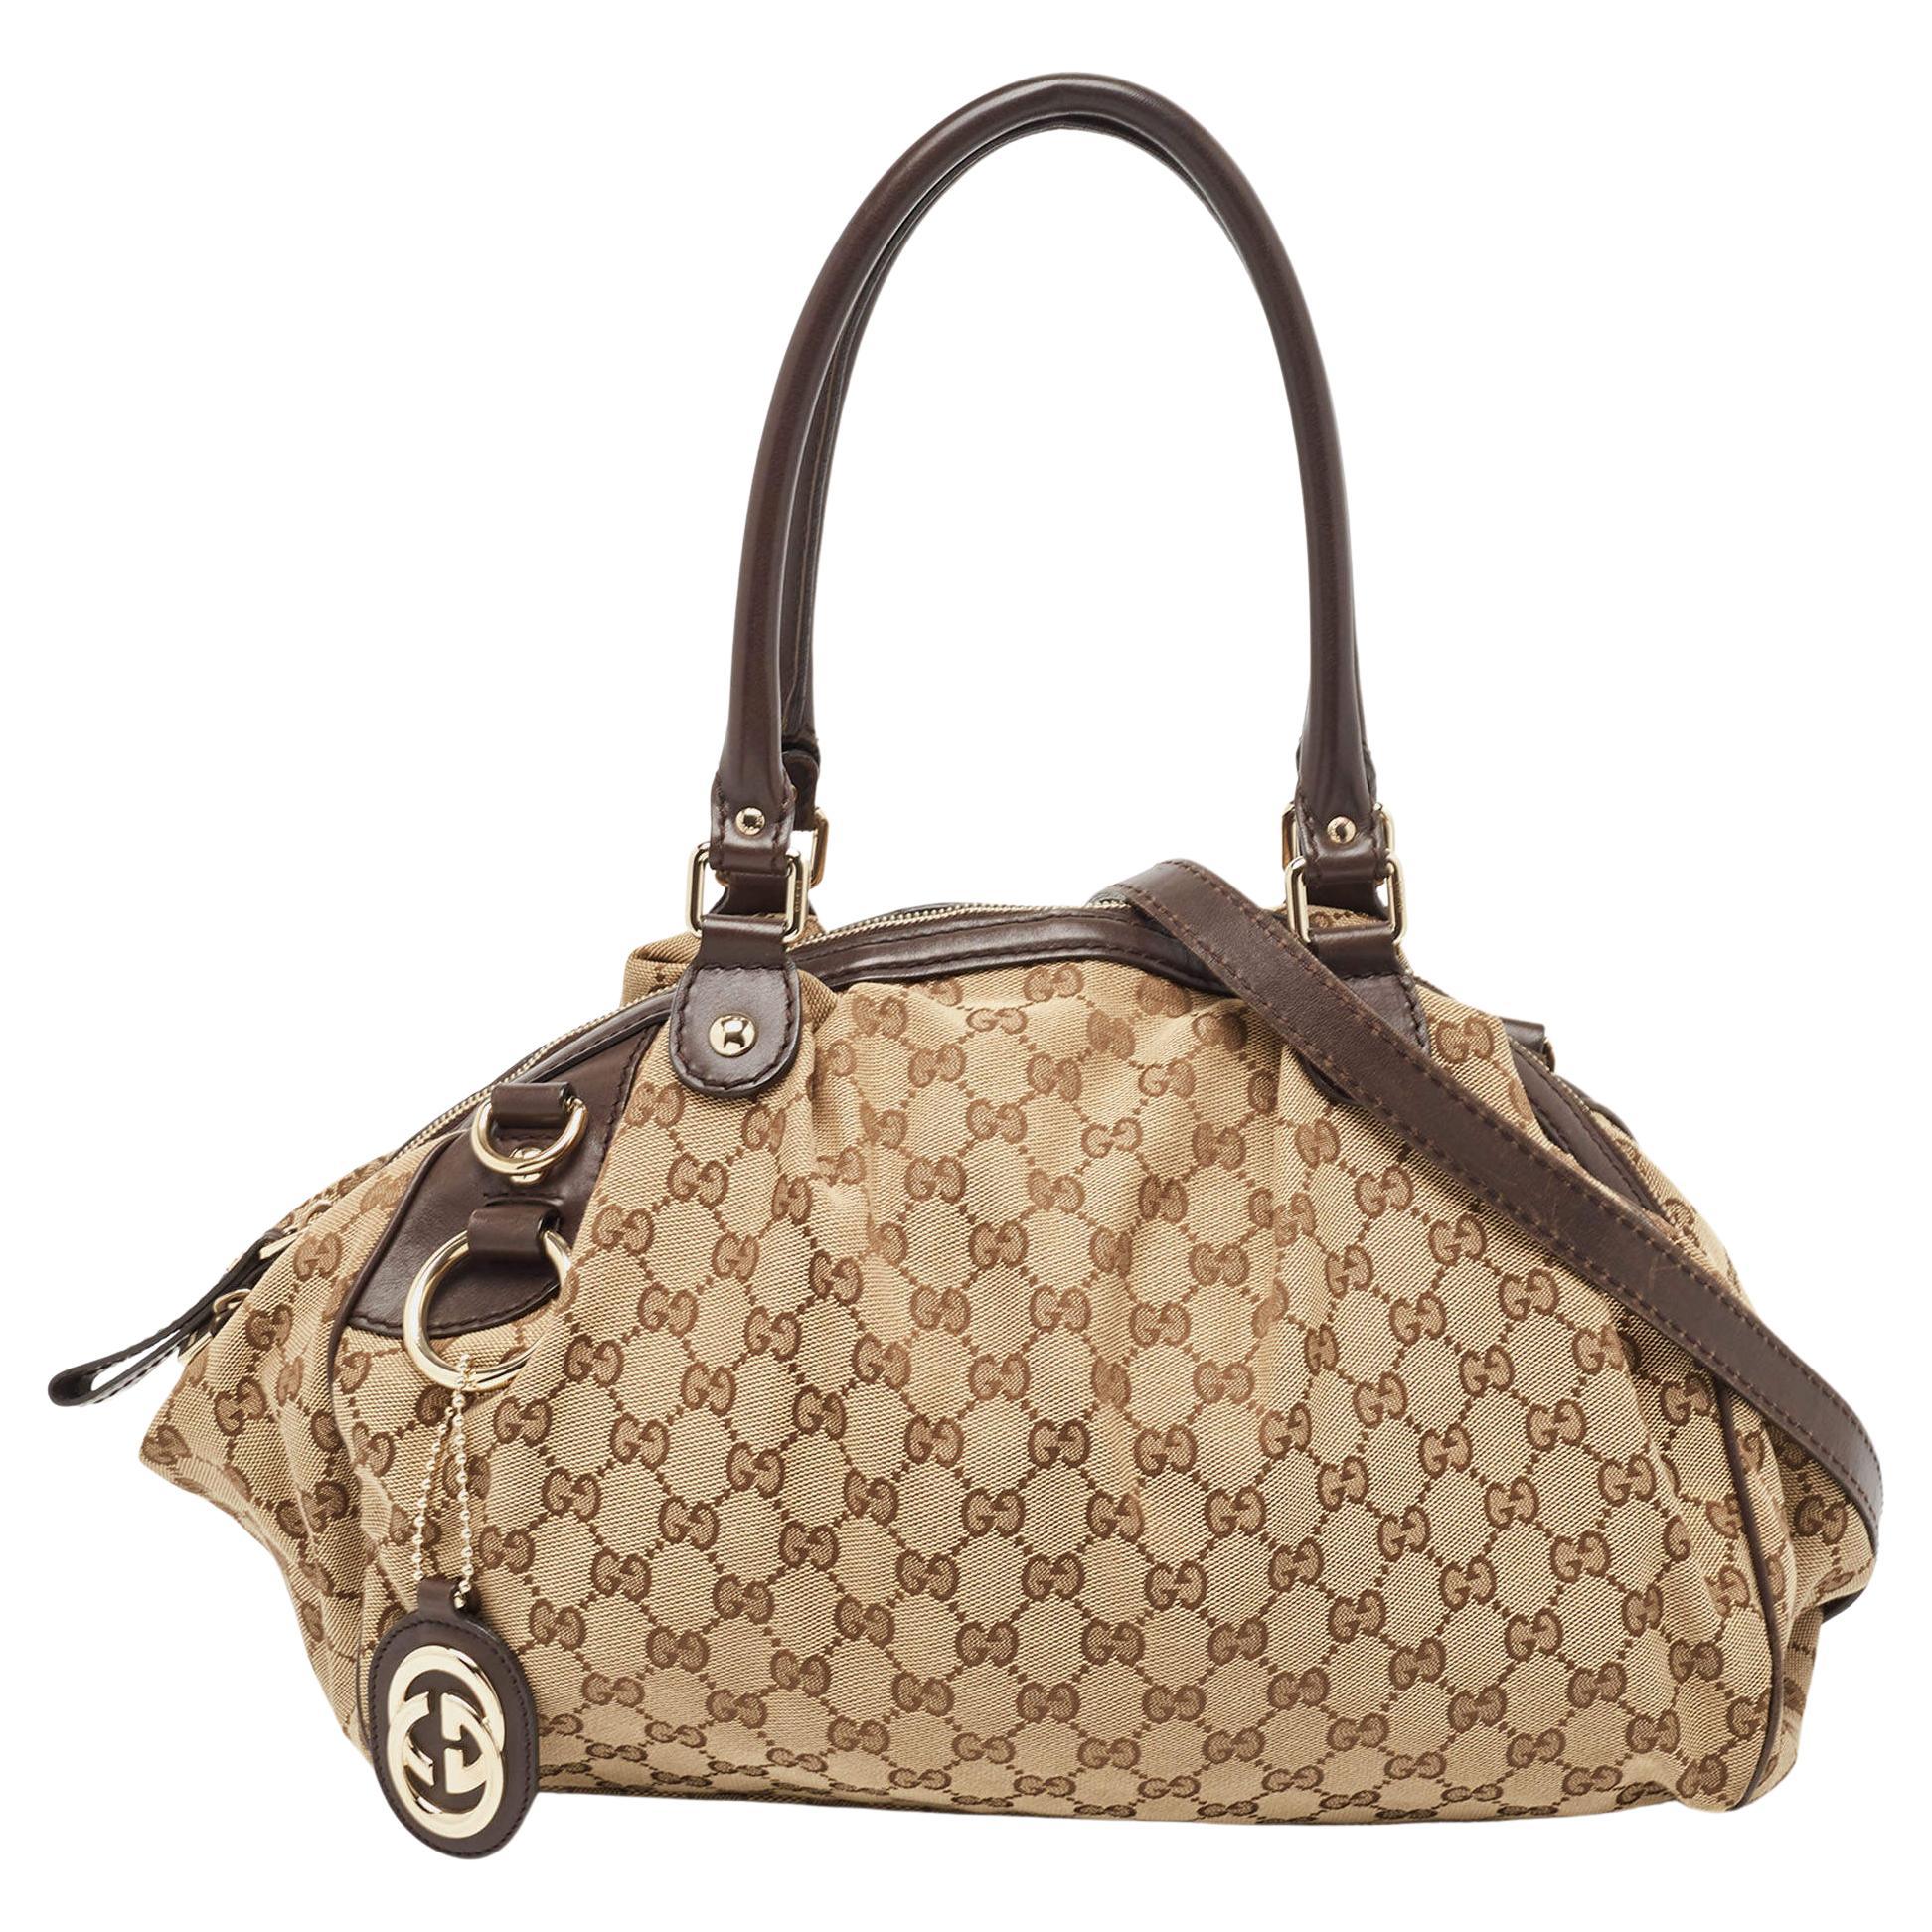 Gucci Brown/Beige GG Canvas and Leather Sukey Boston Bag